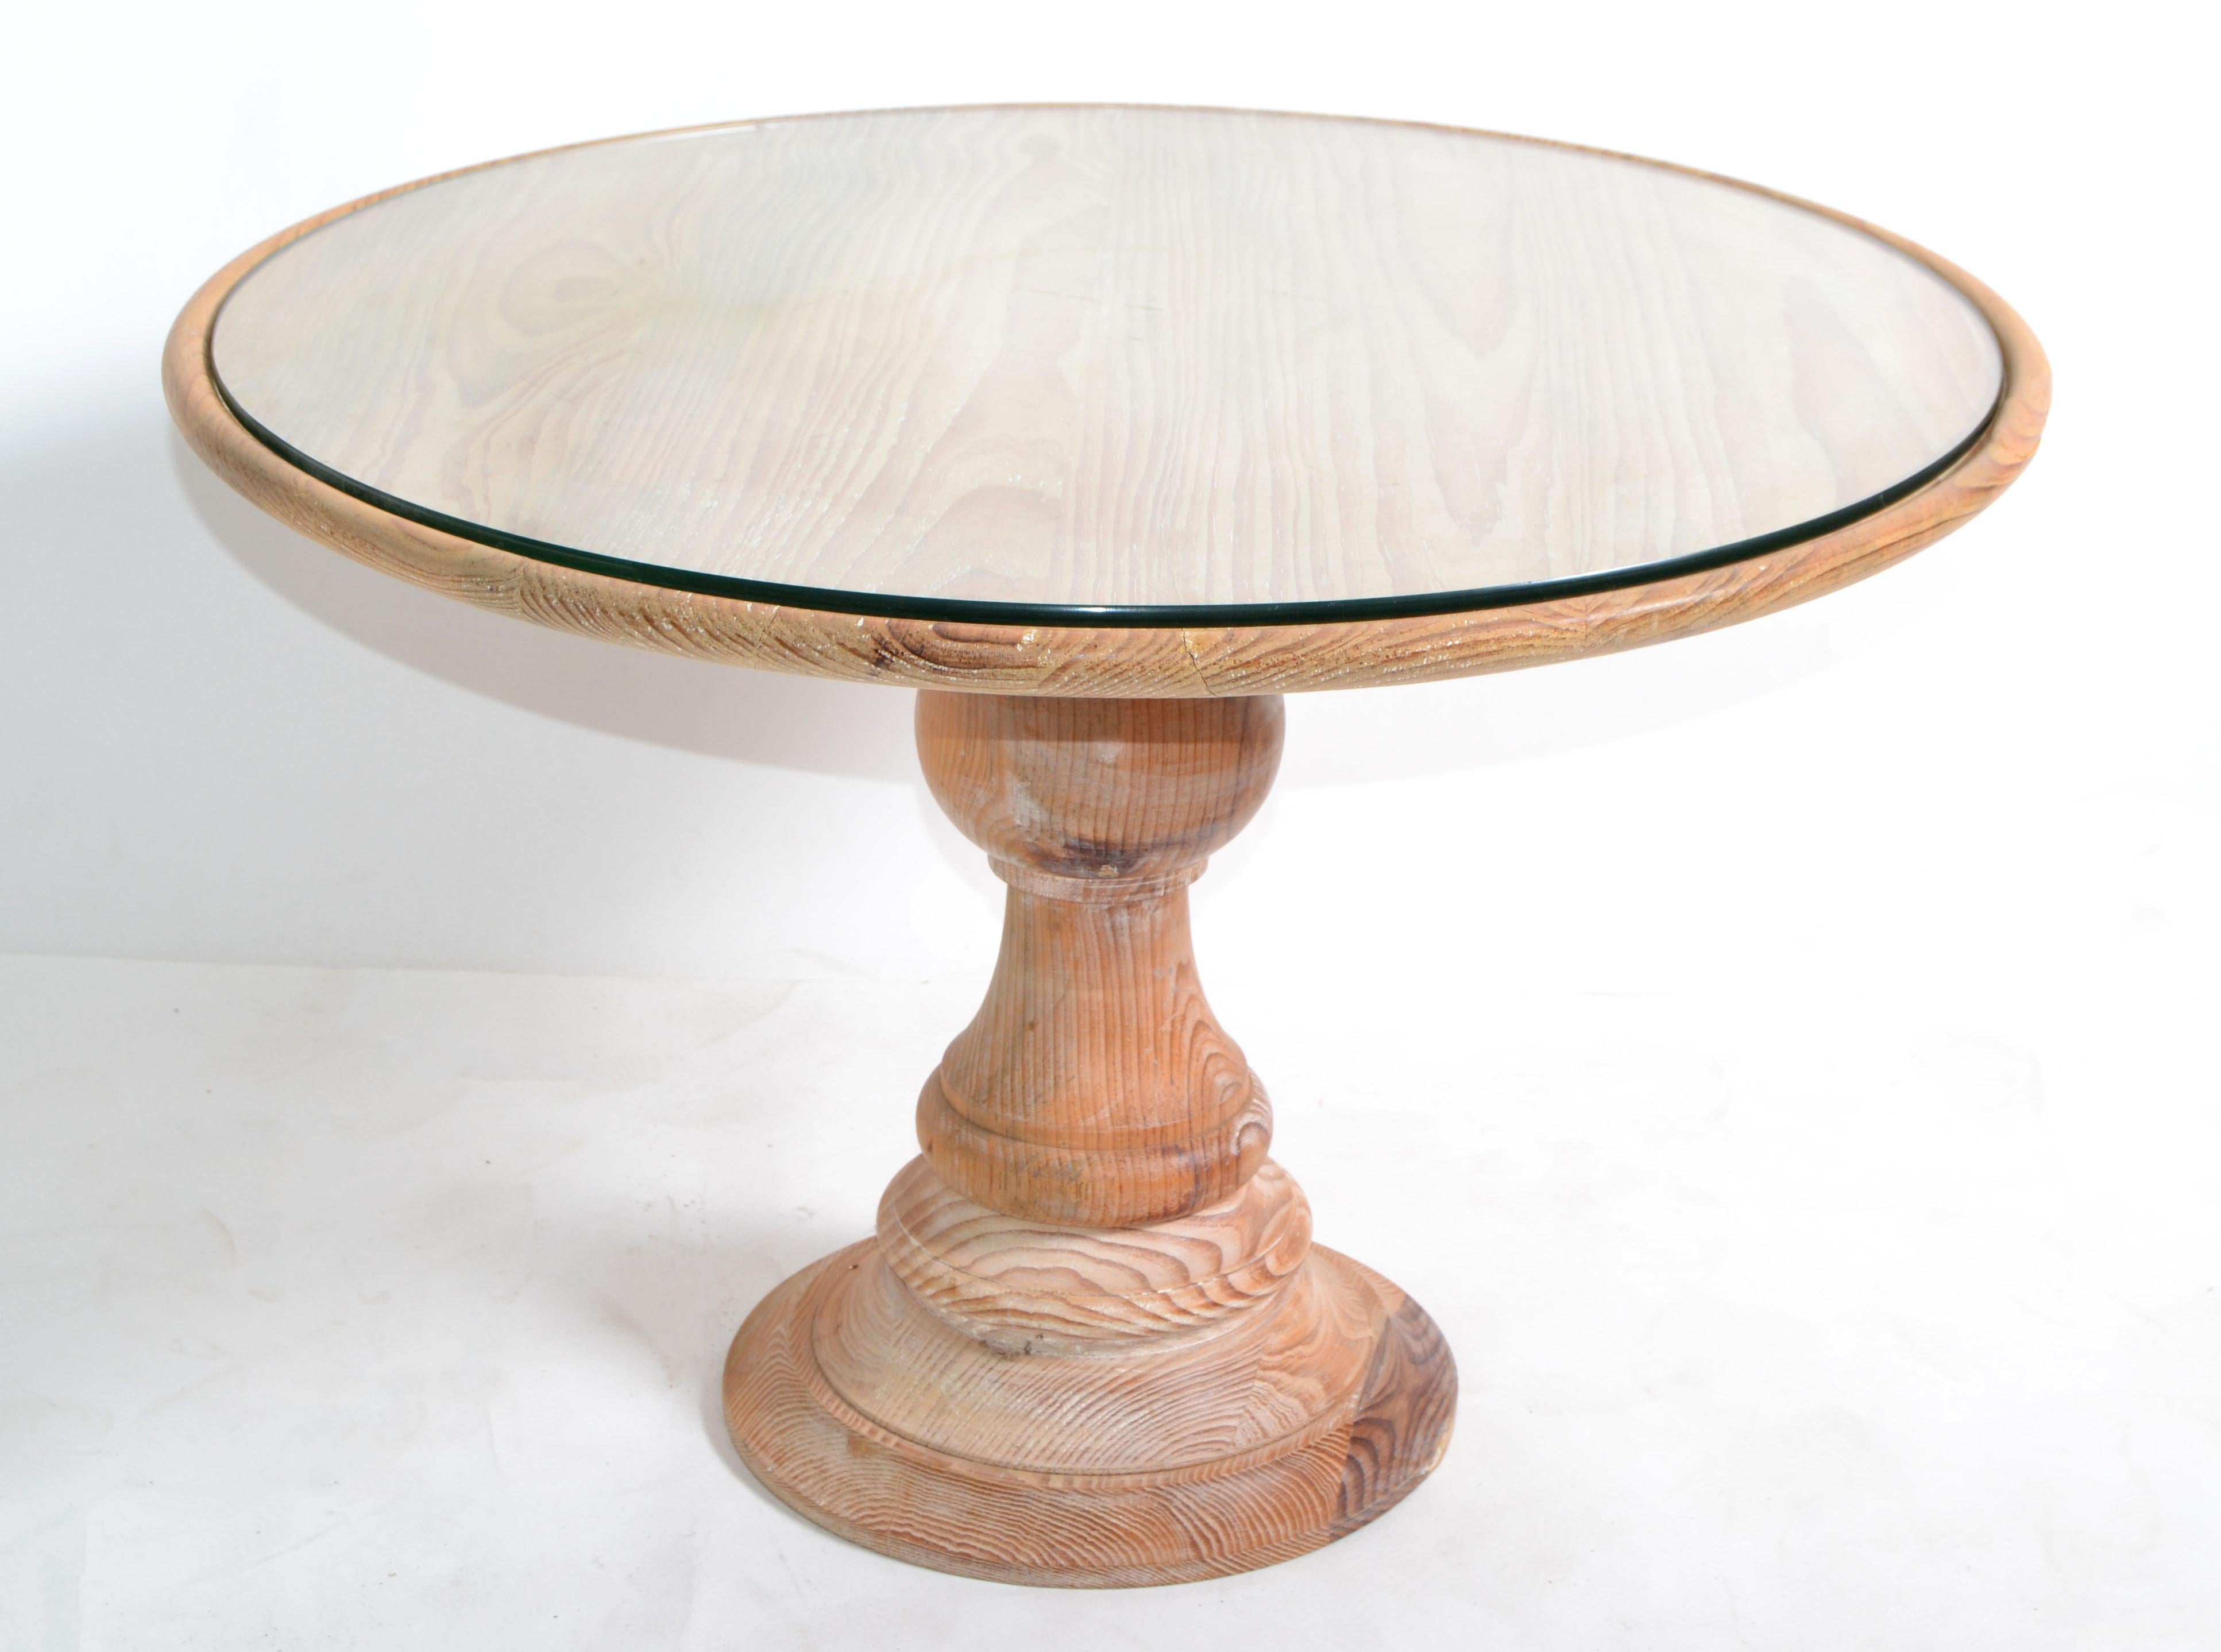 American Round Mid-Century Modern Turned Bleach Oak Wood & Glass Coffee Table For Sale 1